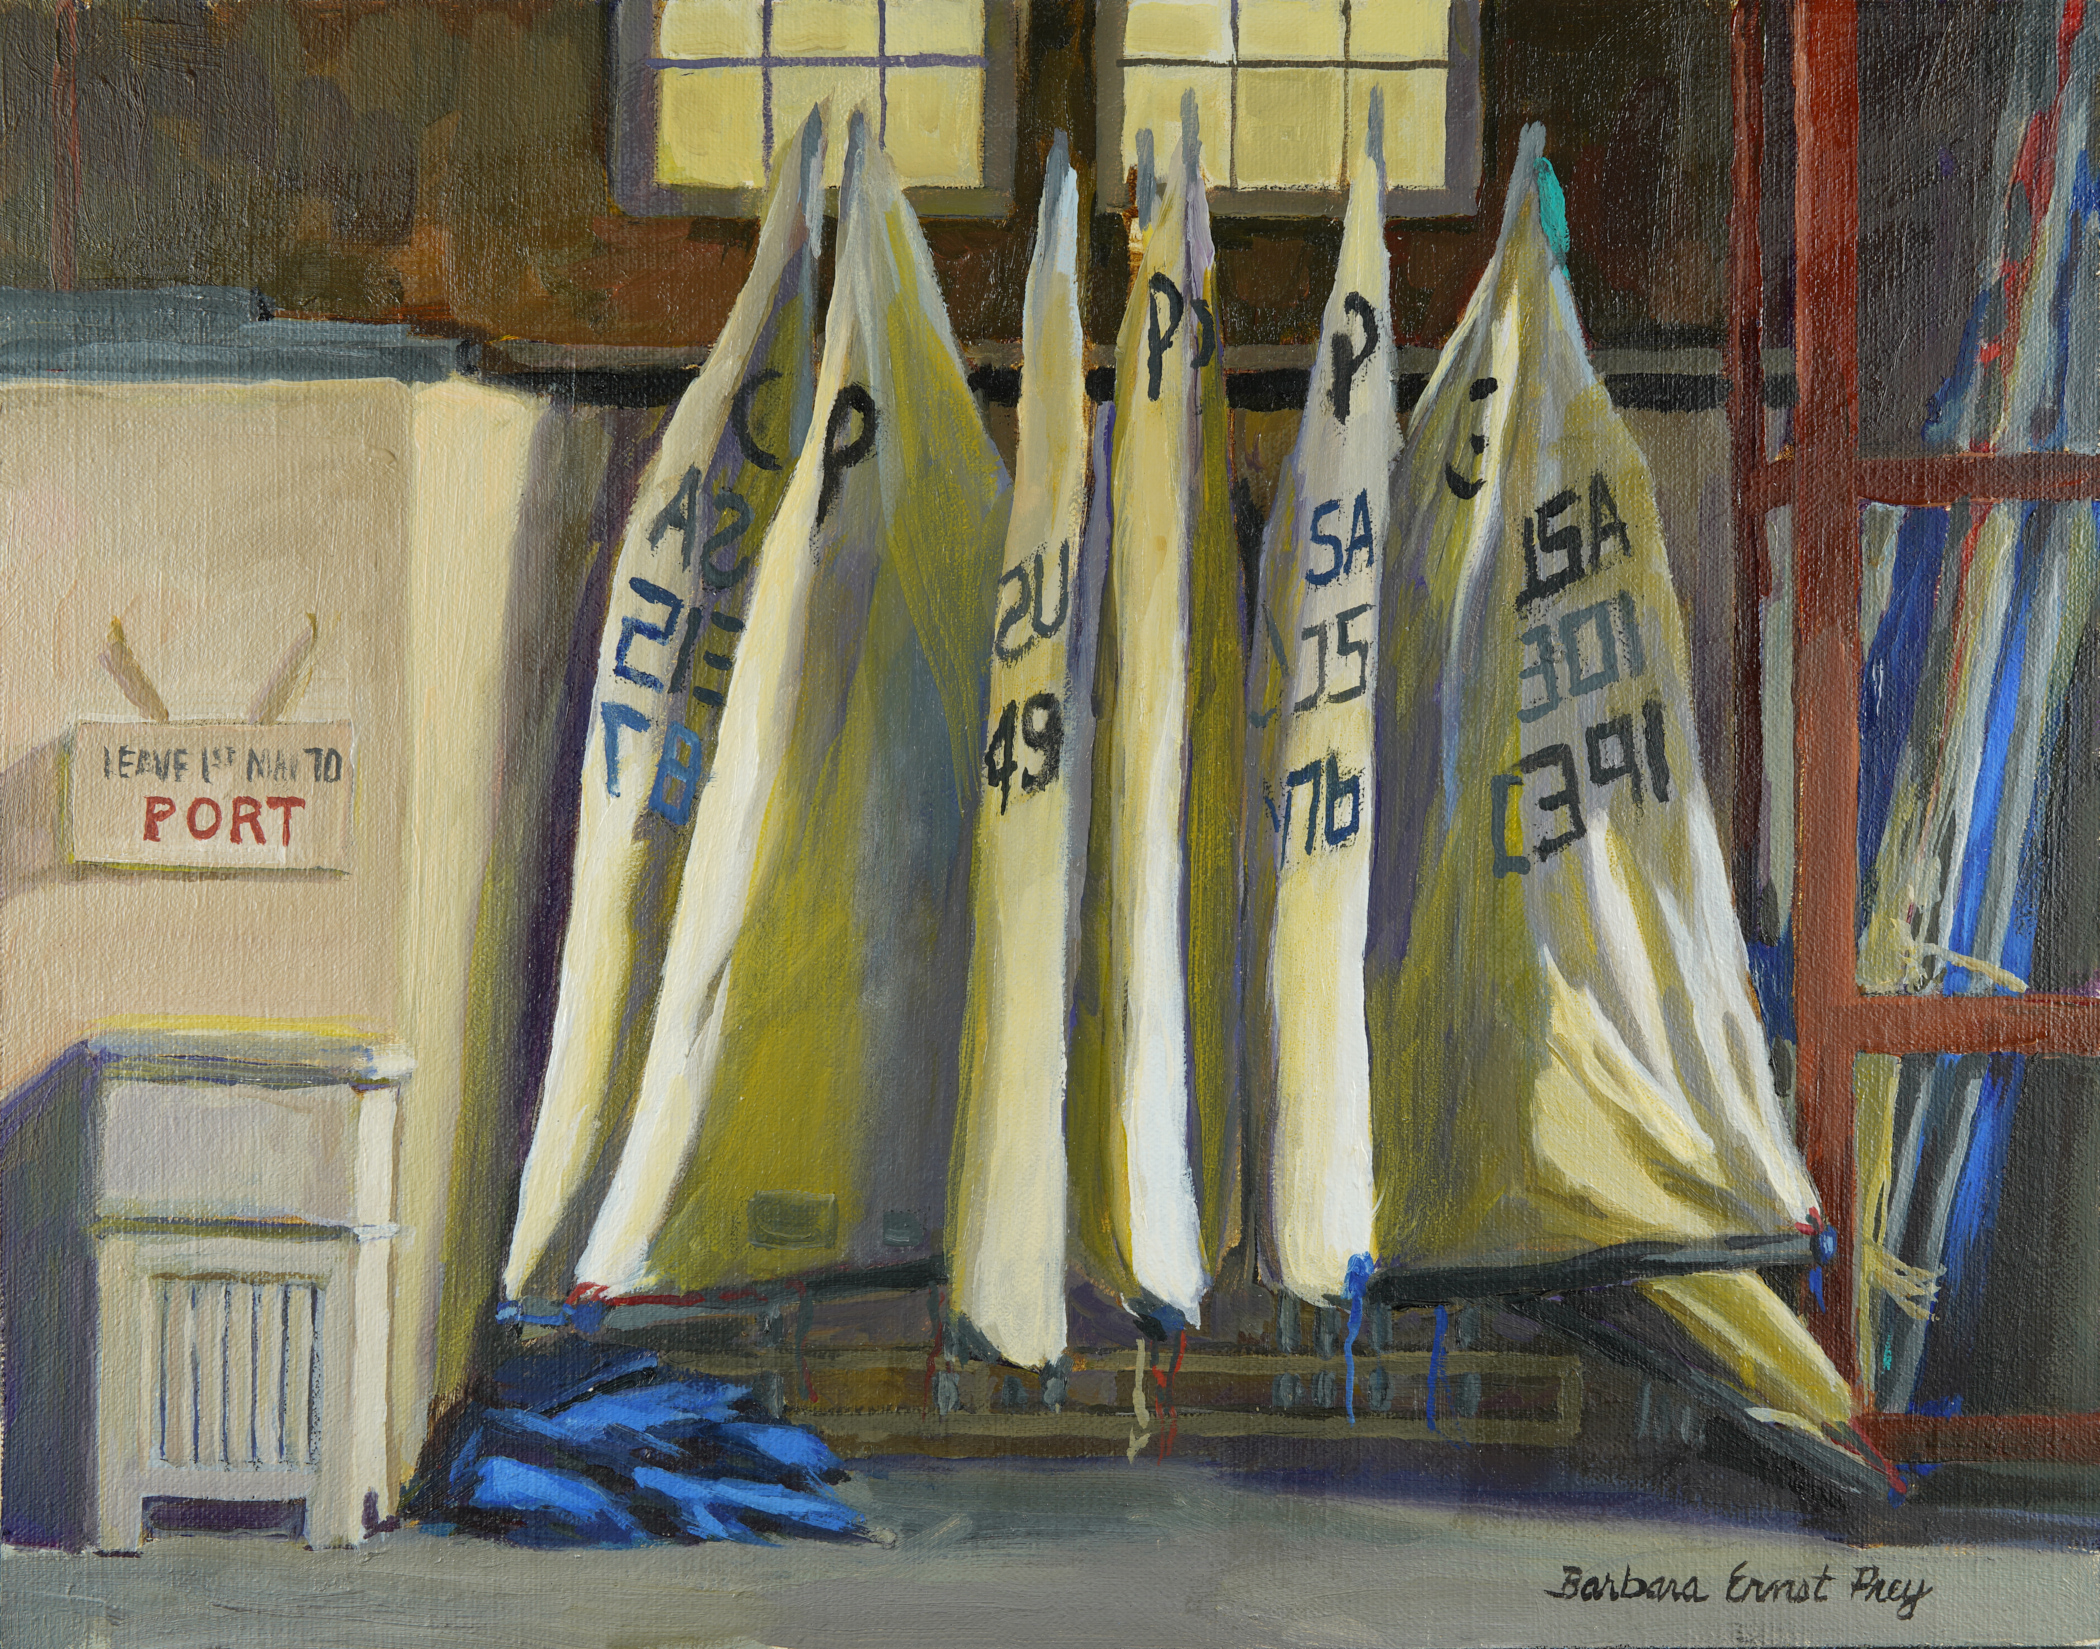 Sail Storage, 2018, Oil on panel, 11 x 14 inches